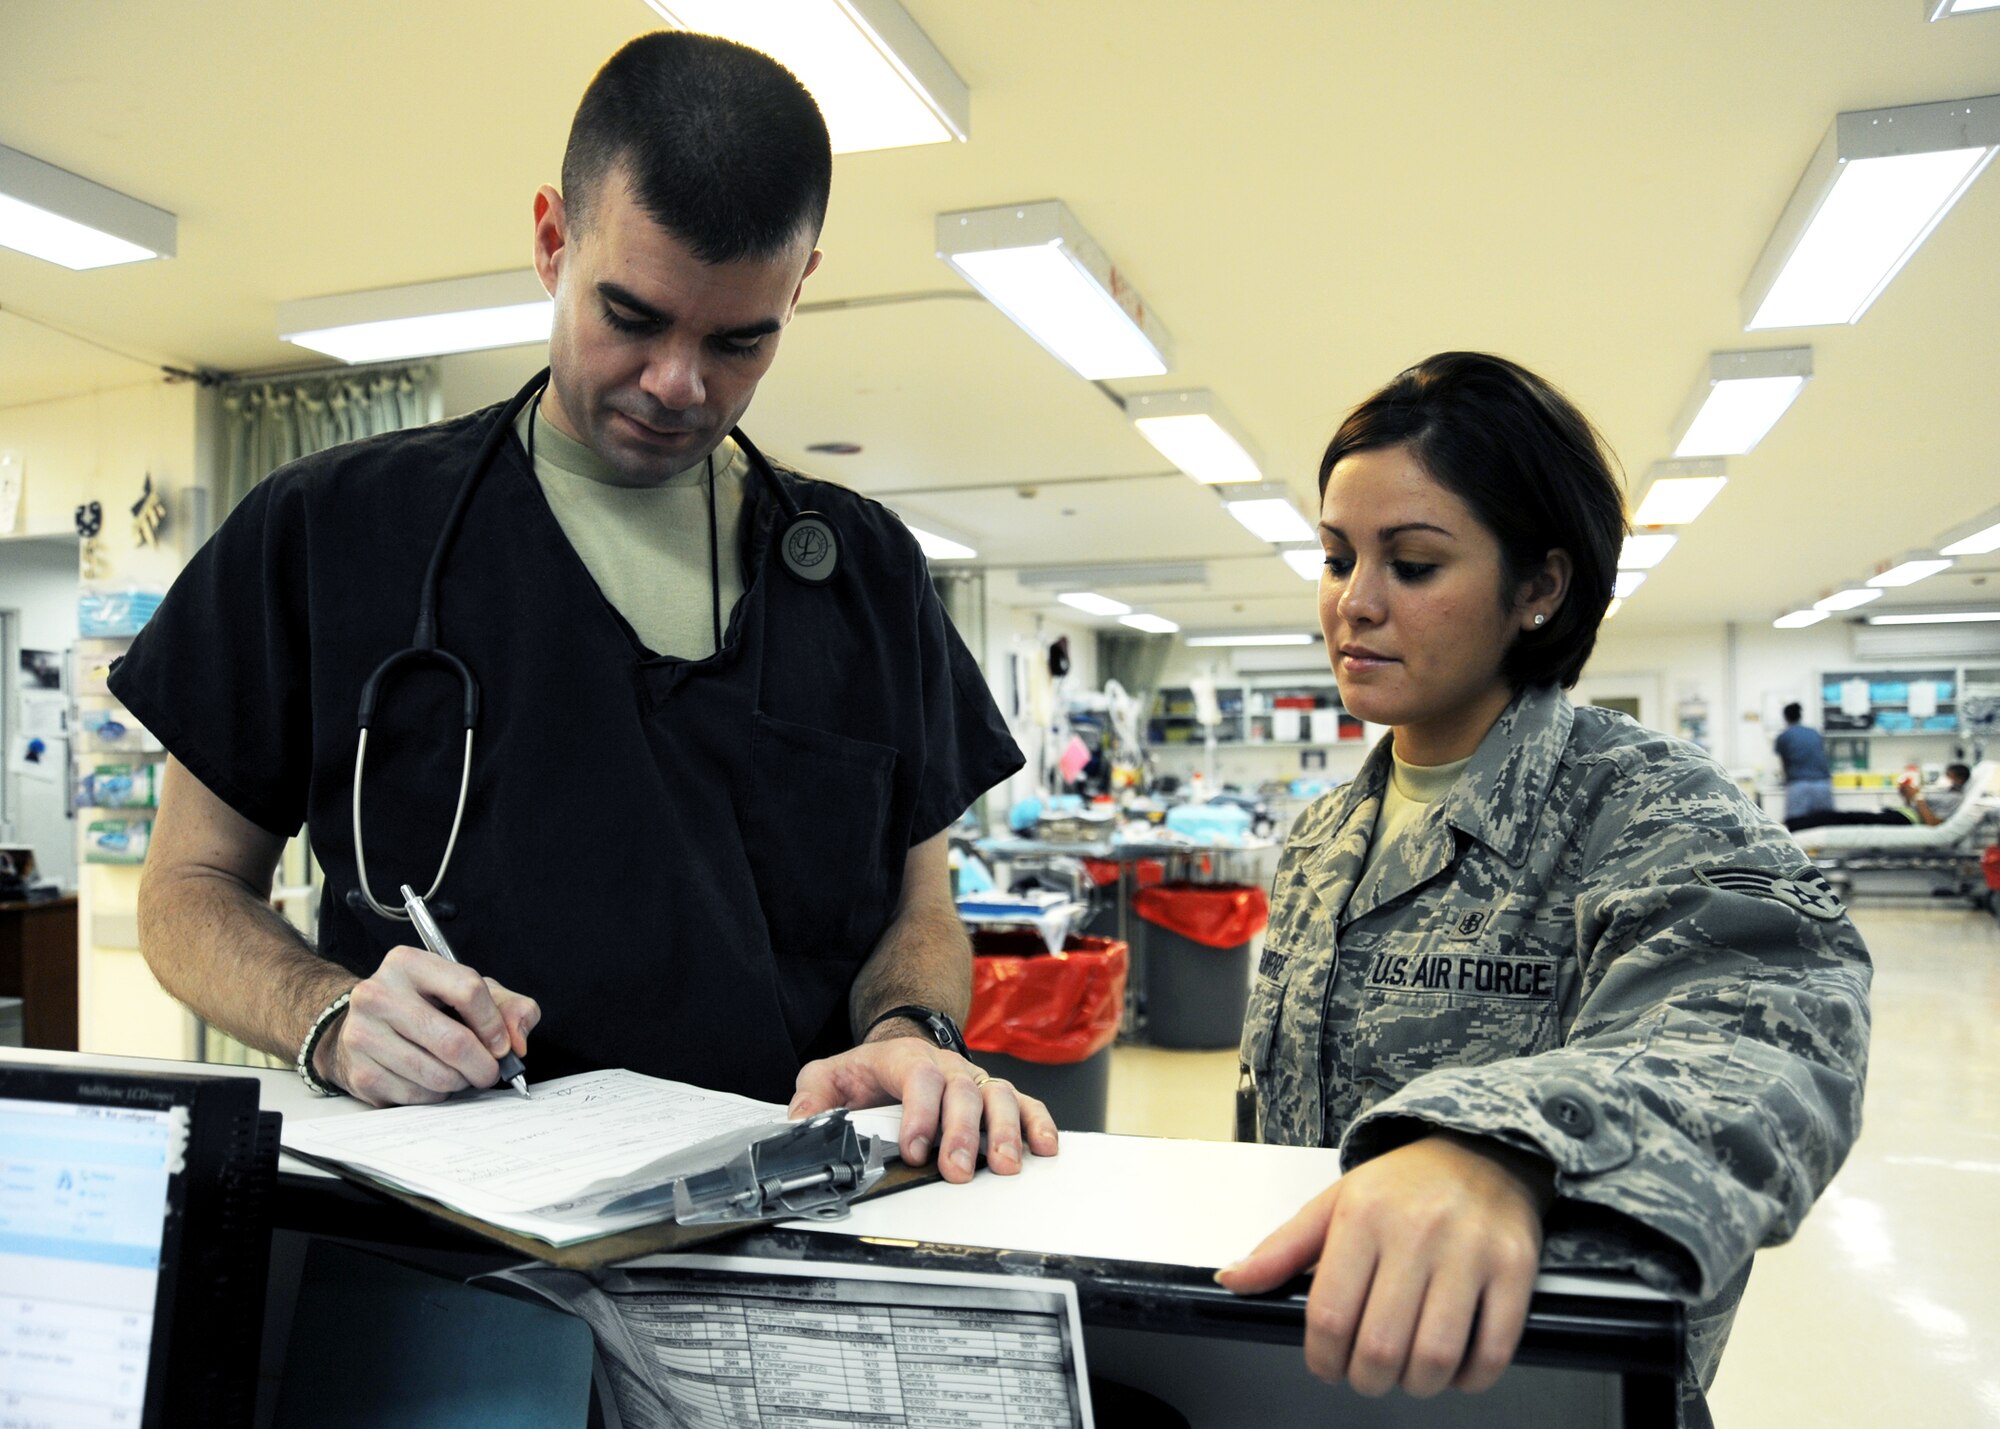 JOINT BASE BALAD, Iraq -- Maj. Shanon Madrid and Senior Airman Catherine Izaguirre, both from the 332nd Expeditionary Medical Support Squadron, fill out necessary paperwork for tracking patient information at the Air Force Theater Hospital Nov. 2, 2009. Airman Izaguirre is responsible for documenting patient information, including known injuries and unit information. (U.S. Air Force photo/Senior Airman Christopher Hubenthal)